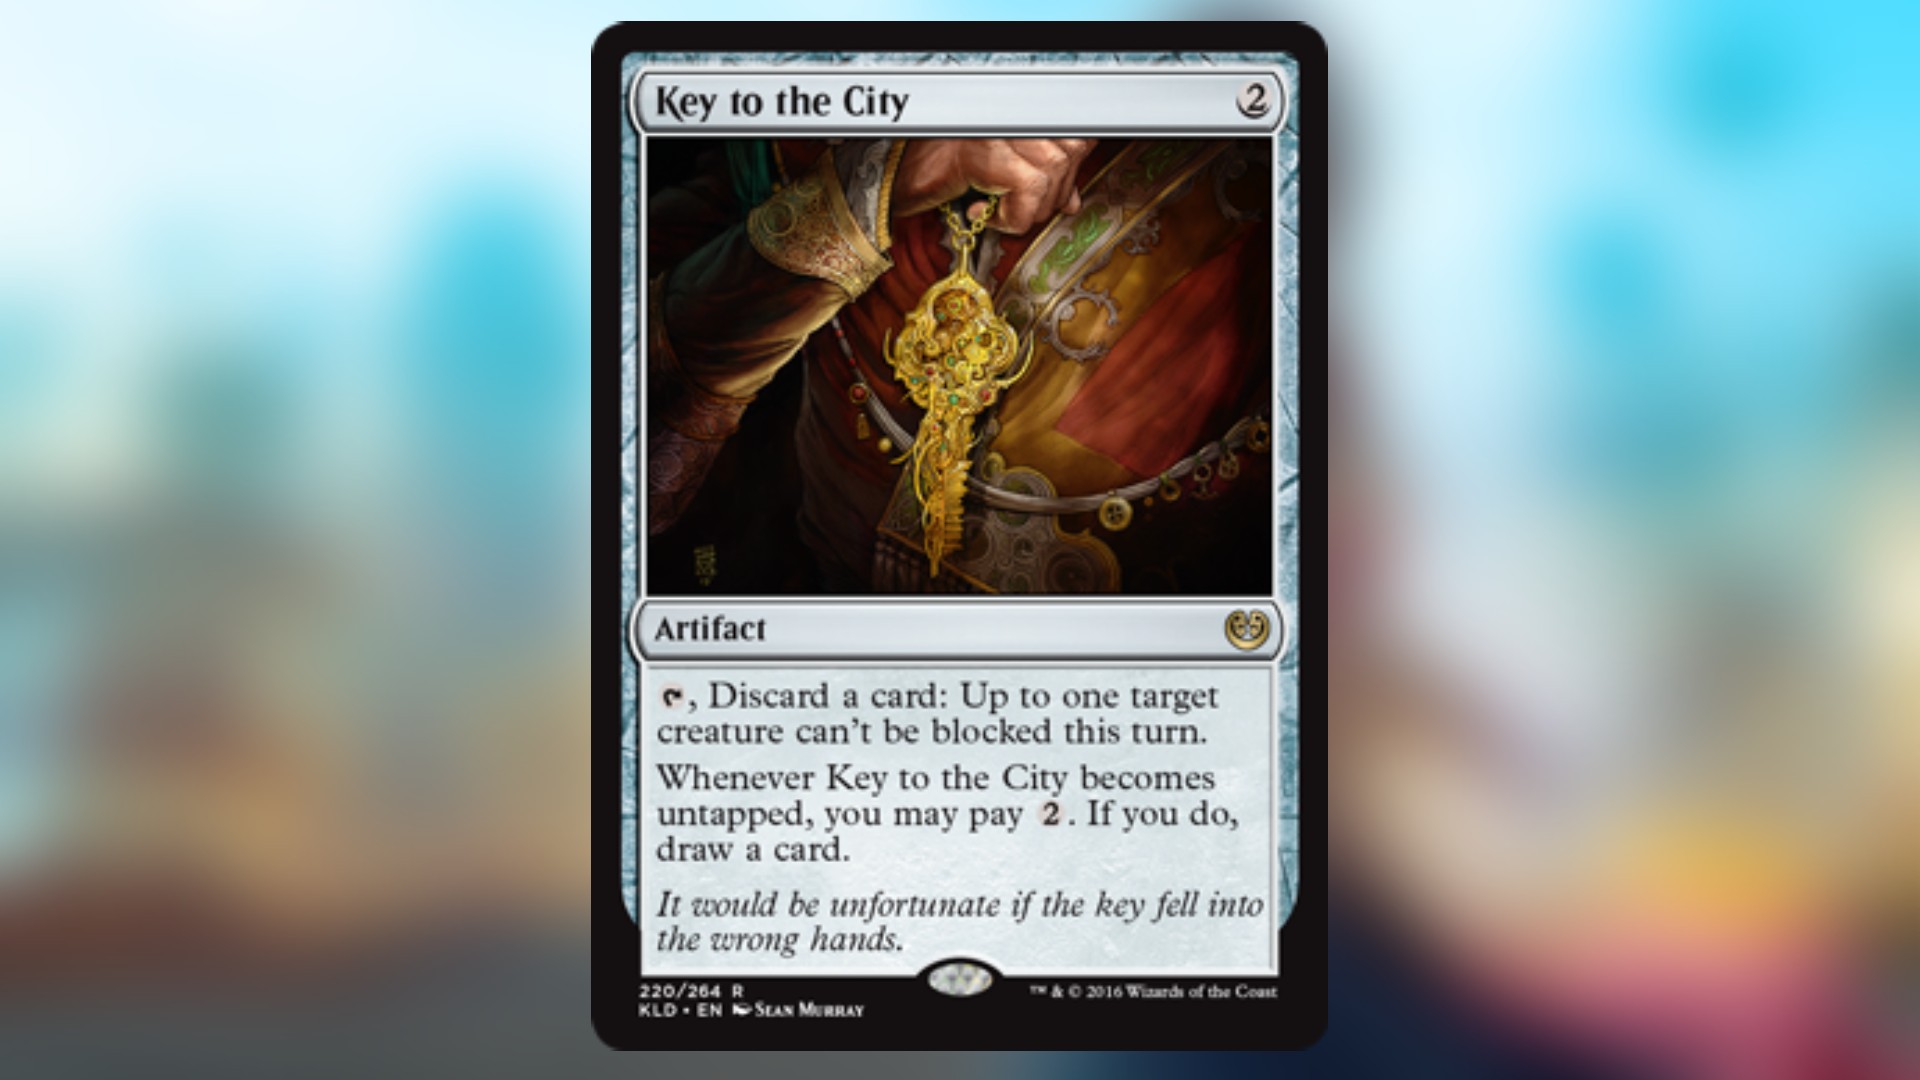 magic the gathering card with no color and art depicting a golden key being worn around someones neck as they clutch at the chain